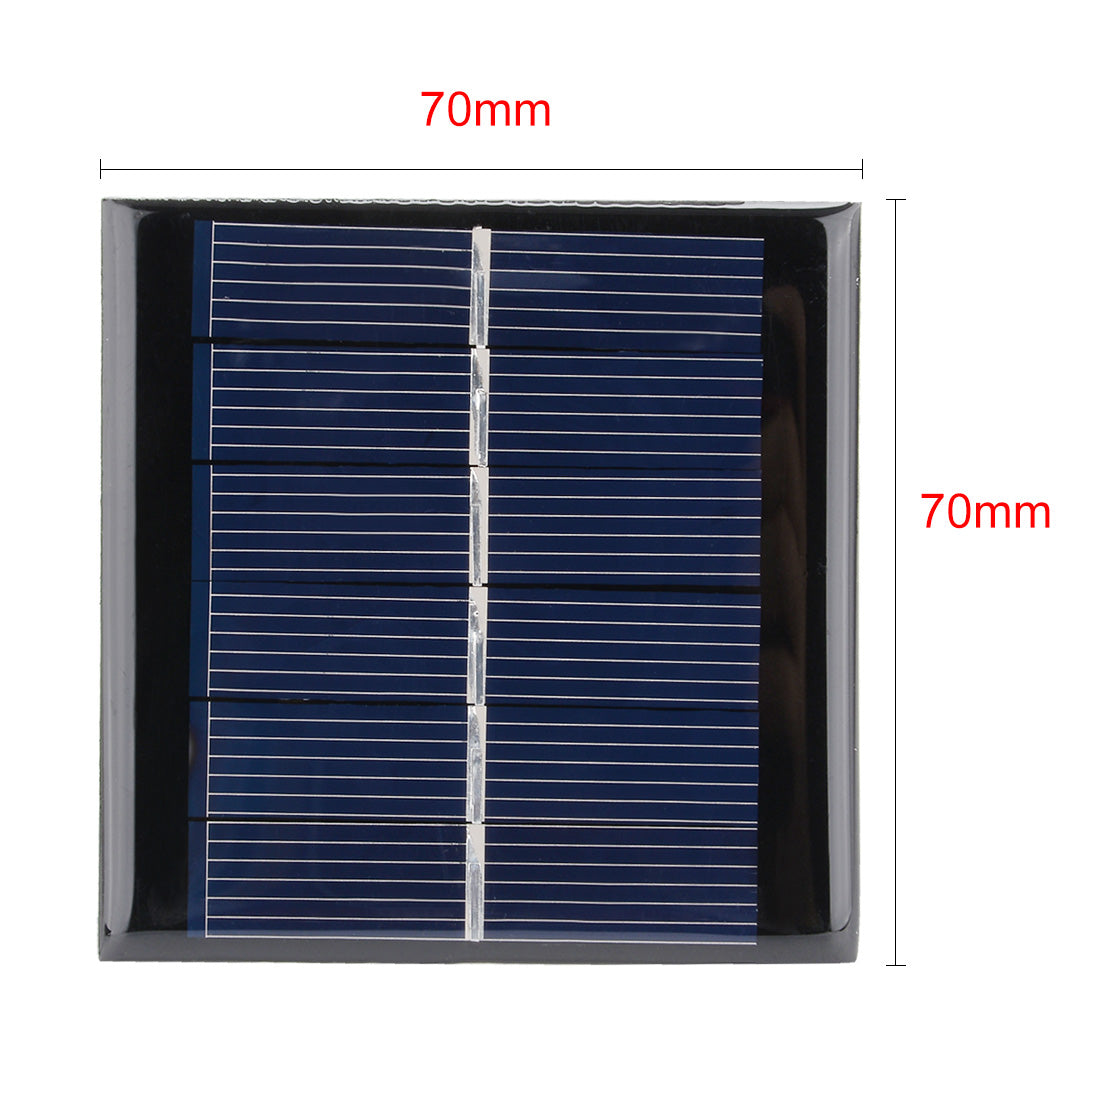 uxcell Uxcell 5Pcs 3V 100mA Poly Mini Solar Cell Panel Module DIY for Phone Light Toys Charger 70mm x 70mm